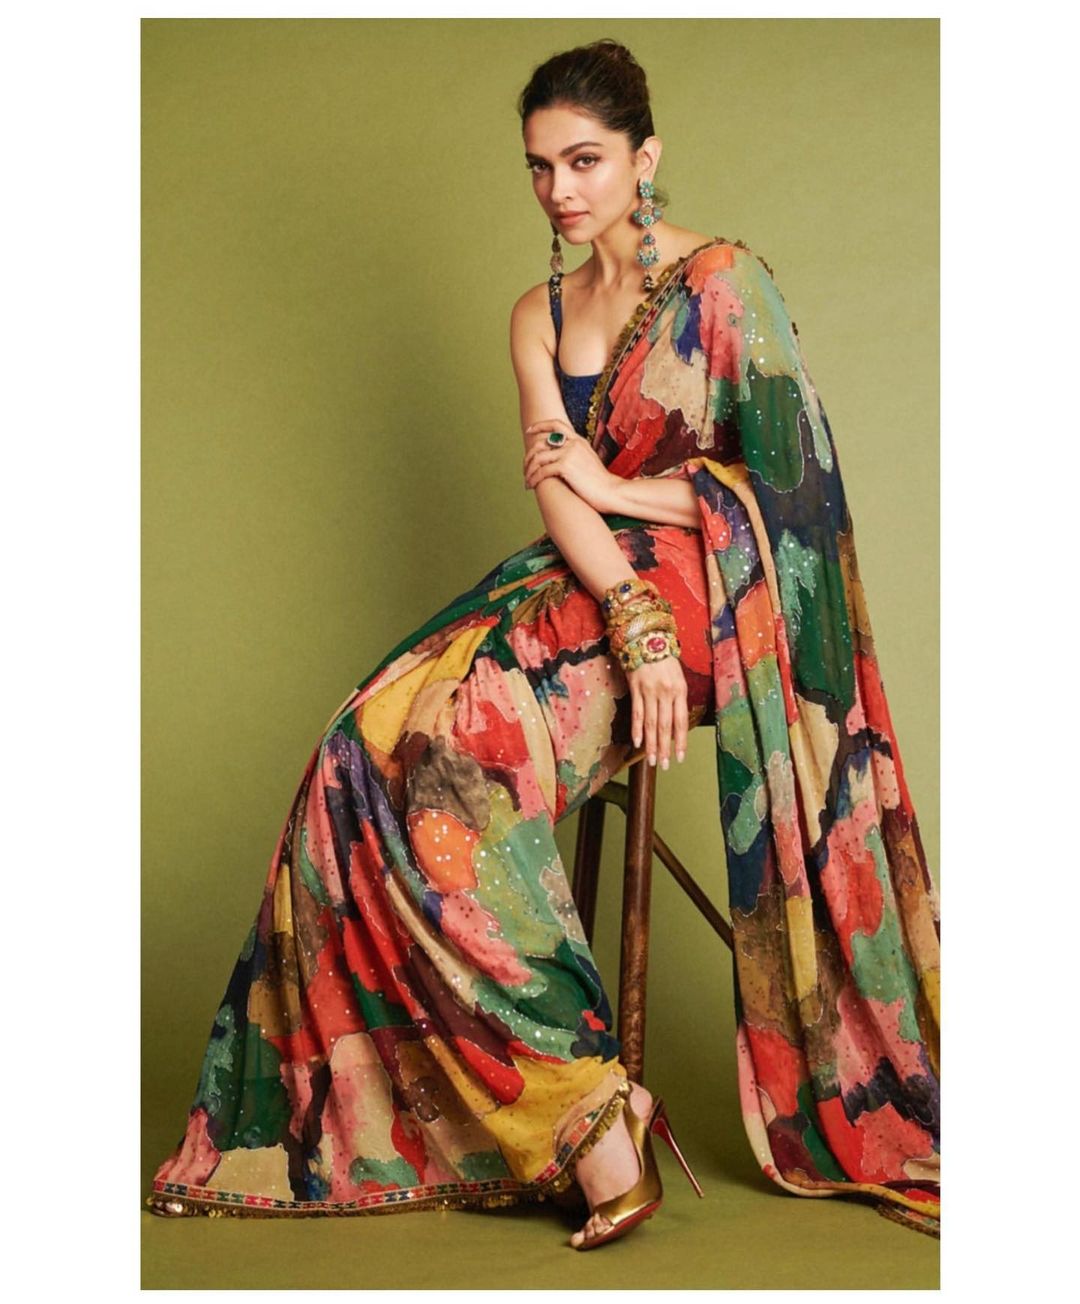 Deepika Padukone sits pretty in the multicoloured shimmer saree